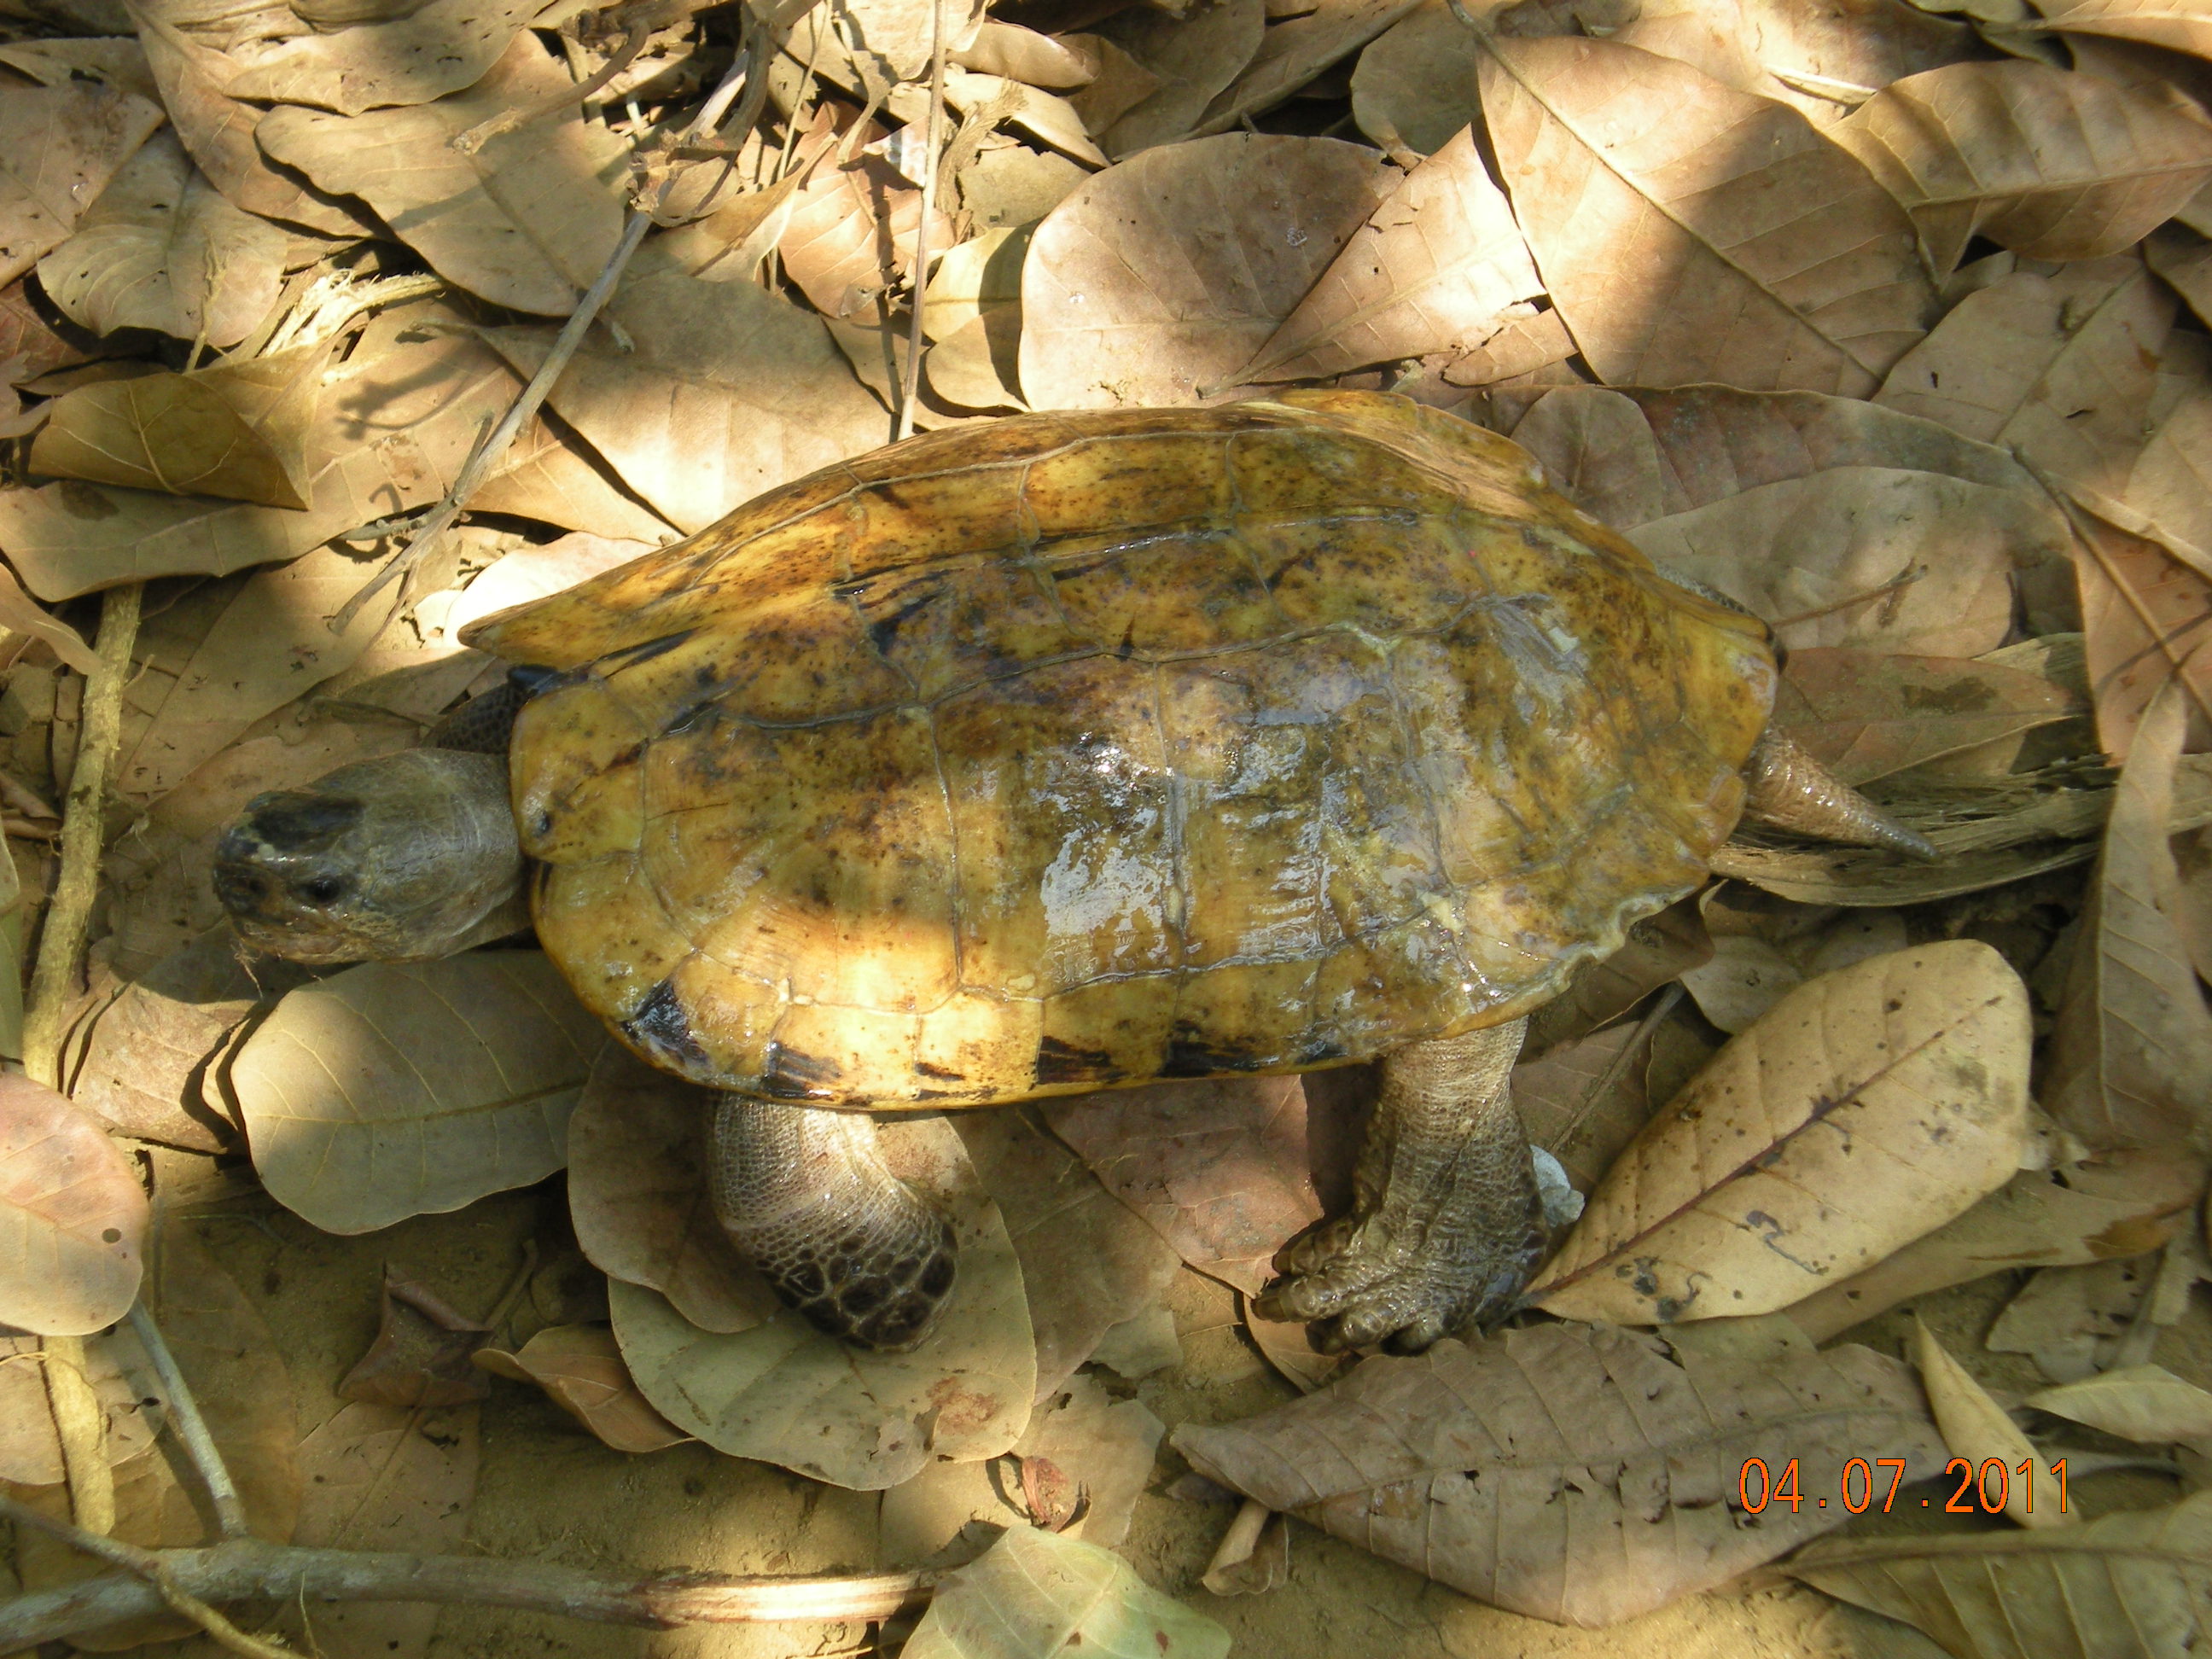 A_male_forest_turtle_enjoys_the_leaf_litter_in_the_new_Gwa_facility